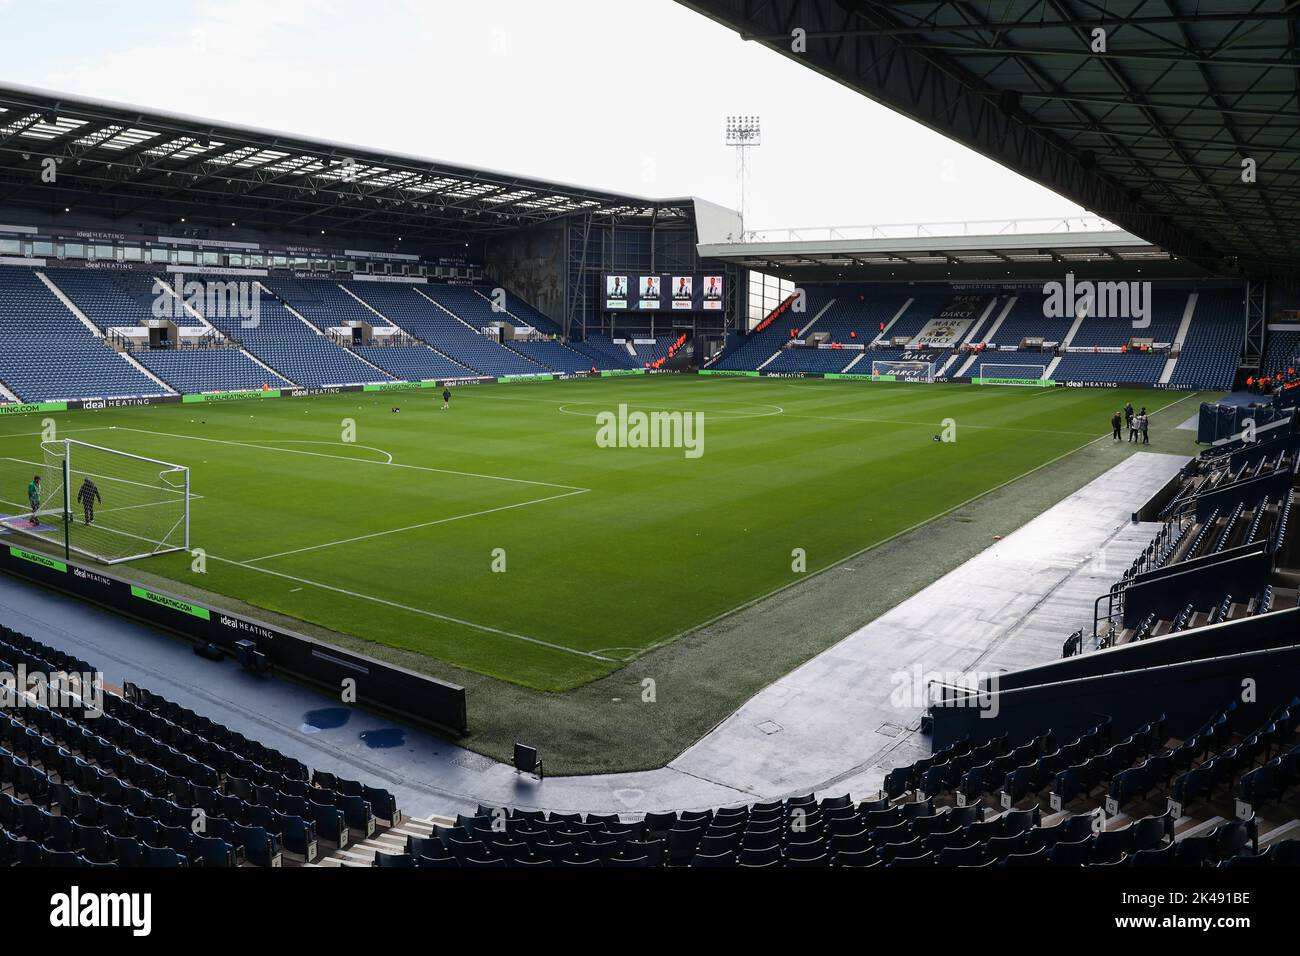 A general view of The Hawthorns during the Sky Bet Championship match West Bromwich Albion vs Swansea City at The Hawthorns, West Bromwich, United Kingdom, 1st October 2022  (Photo by Simon Bissett/News Images) Stock Photo